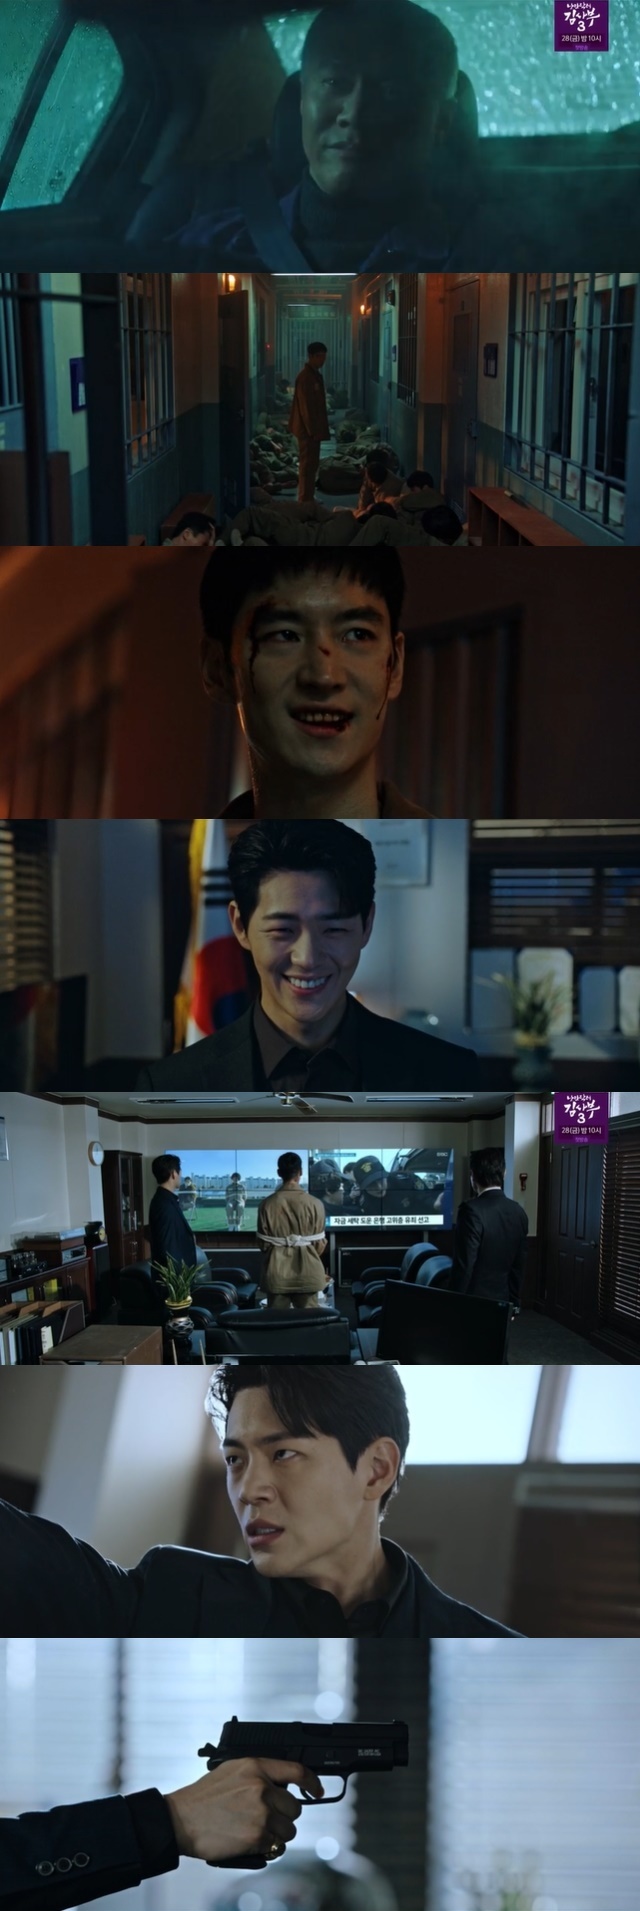 Lee Je-hoon reversed the trap set by the gold society and raised the black money of the gold society to the surface.In the 15th episode of the SBS Friday-Saturday drama Taxi Driver (playwright Oh Sang-ho, director heresy), which aired on April 14, The RainbowLuck, who fell into the trap of the gold society, was depicted.On this day, kim do-gi and The RainbowLuck approached the identity of the gold society. The suspicious ring that members of the gold society have in common.The RainbowLuck noticed late that Kota Yas corrupt police officer (Park Sung-keun) and apartment Illegal subscription broker Kang Pro (Kim Do-yoon) were all in a relationship with the gold society.In the meantime, a diocesan general (Park Ho-san) also aimed at The Rainbow Luck.As The Client of The Rainbow Luck, he boarded the Taxi Driver and asked to save my son in prison. The story was that his son was wrongfully imprisoned and was being threatened with death in prison.kim do-gi and The Rainbow Luck were duped by a diocesan general.In particular, Lee si-wan, a banker named son of a diocesan general, reported an unusual foreign exchange transaction flow to the police and was in a bad situation. In the midst of the money transaction, Kota Yas irregular police, Illegal subscription broker Kang Pro, and Yin Samo of Black Sun Gate.The RainbowLuck guessed that kim do-gi caught the people of Black Sun and had to flee to the hidden black funds.Kim do-gi, Choi Joo-im (Jang Hyuk-jin), Park Joo-im! Infiltrated the prison to solve the case.At that time, Jang Seong-choel (Kim Eui-sung) approached the prosecution offices case data room as Park Hyun-jo (Park Jong-hwan) reported just before he was killed.In it, Jang Seong-choel got clues about a sibling welfare center where a diocesan general was a distributed ledger in the past.Kim do-gi found out the reward was on Lee si-wan in prison.Were going to need a shield to protect Mr. Lee si-wan, with or without us, Kim do-gi said, turning into a self-proclaimed crazy X.Kim do-gi had a bad taste of prison rice, so he tackled the prisoners for minor reasons such as heavy lifting, and the prisoners who were defeated each time avoided kim do-gi.Kim do-gi then called Lee si-wan, who returned from the infirmary, his best friend and protected him.As a result, the dividend game aimed at lee si-wan soon disappeared, but kim do-gi was caught up in strange anxiety, saying, It is strange and it works so well.Kim Do-gis anxiety soon became a reality.Jang Seong-choel, who went to the brothers and sisters welfare center alone, knew through the frame on the wall that the father of Lee si-wan, The Client, was involved in the gold society, but was immediately attacked by a man.At the same time, Kim Do-gi was re-trapped in a prison cell just before leaving the prison.On Ha Joon (Shin Jae-ha) was also behind the scenes. On Ha Joon was watching Kim do-gi through CCTV.Afterwards, Prisoners attacked Kim do-gis The Reward, and On Ha Joon, who appeared in front of Kim do-gi, announced that Kim do-gi was not the only one in danger.He told kim do-gi that the car that Choi Joo-im, Park Joo-im!, and lee si-wan were riding in did not even get to the judge and there was an accident.On Ha Joon said to Kim do-gi, If you touch them, I will kill you. If you wonder what happened to them, come to me later. But if you go past 12 oclock, The Reward doubles.Blackmail  ⁇  Cinémix Par Chloé: The only way for others to live is for you to be alive. Since then, Kim do-gi has entered into a bloody battle with the Prisoners who want to kill him.Jang Seong-choel, who passed out and woke up unharmed, confronted a diocesan general.Jang Seong-choel told a diocesan general, Distributed ledger, a welfare center that took a fake priest and kidnapped people and took their lives.Many innocent children were kidnapped waiting for their parents at a bus stop in the neighborhood and were assaulted, abused and killed in the hellish place you run. On the other hand, Kim do-gi, who had defeated all the Prisoners and reached Ha Joon, had a picture in front of his eyes: Ango Eun, Choi Ji-im, and Park Ha Joon, who were kidnapped and tied side by side in the hands of the Golden Society.On Ha Joon told kim do-gi to rank in his mind and to make them fall off the roof in less precious order.Kim do-gi said, Keep in mind, even if we stop here, someone else will show up and go to you. I will Memory your guys to the end.The father did not forget his son who had not been heard from, so the two could meet again.Because a little child less than 10 years old did not forget his brother, he did not forget the sea that he was going to go with, so he could reveal the truth to the world because he remembered the death of the unjust detective.Because of the memory, I could come before you. On Ha Joon counted down to Blackmail  ⁇  Cinémix Par Chloé.At this time, kim do-gi, who asked a sudden question, What time is it now? Its one oclock in the afternoon. Thank goodness. After 12 oclock. I want to choose number four.I think there are people who feel more dirty than you. Immediately, the news broke, and Lee si-wan, who was convinced that the gold society was dead, but attended the trial safely, and Choi Joo-im and Park Joo-im!The time went back to the day before. Kim do-gi and Jang Seong-choel appeared in front of Ango-eun, who felt so suspicious that the whole prison was a huge trap made by them.(But) Lee si-wan, who is protected by Kim do-gi, is a real victim. Kim do-gi immediately said, The law that makes Lee si-wan safe is to attend the trial and complete the testimony.Until then, we have to focus all our attention on us. It may be more dangerous than we thought. We may have to risk our lives. 